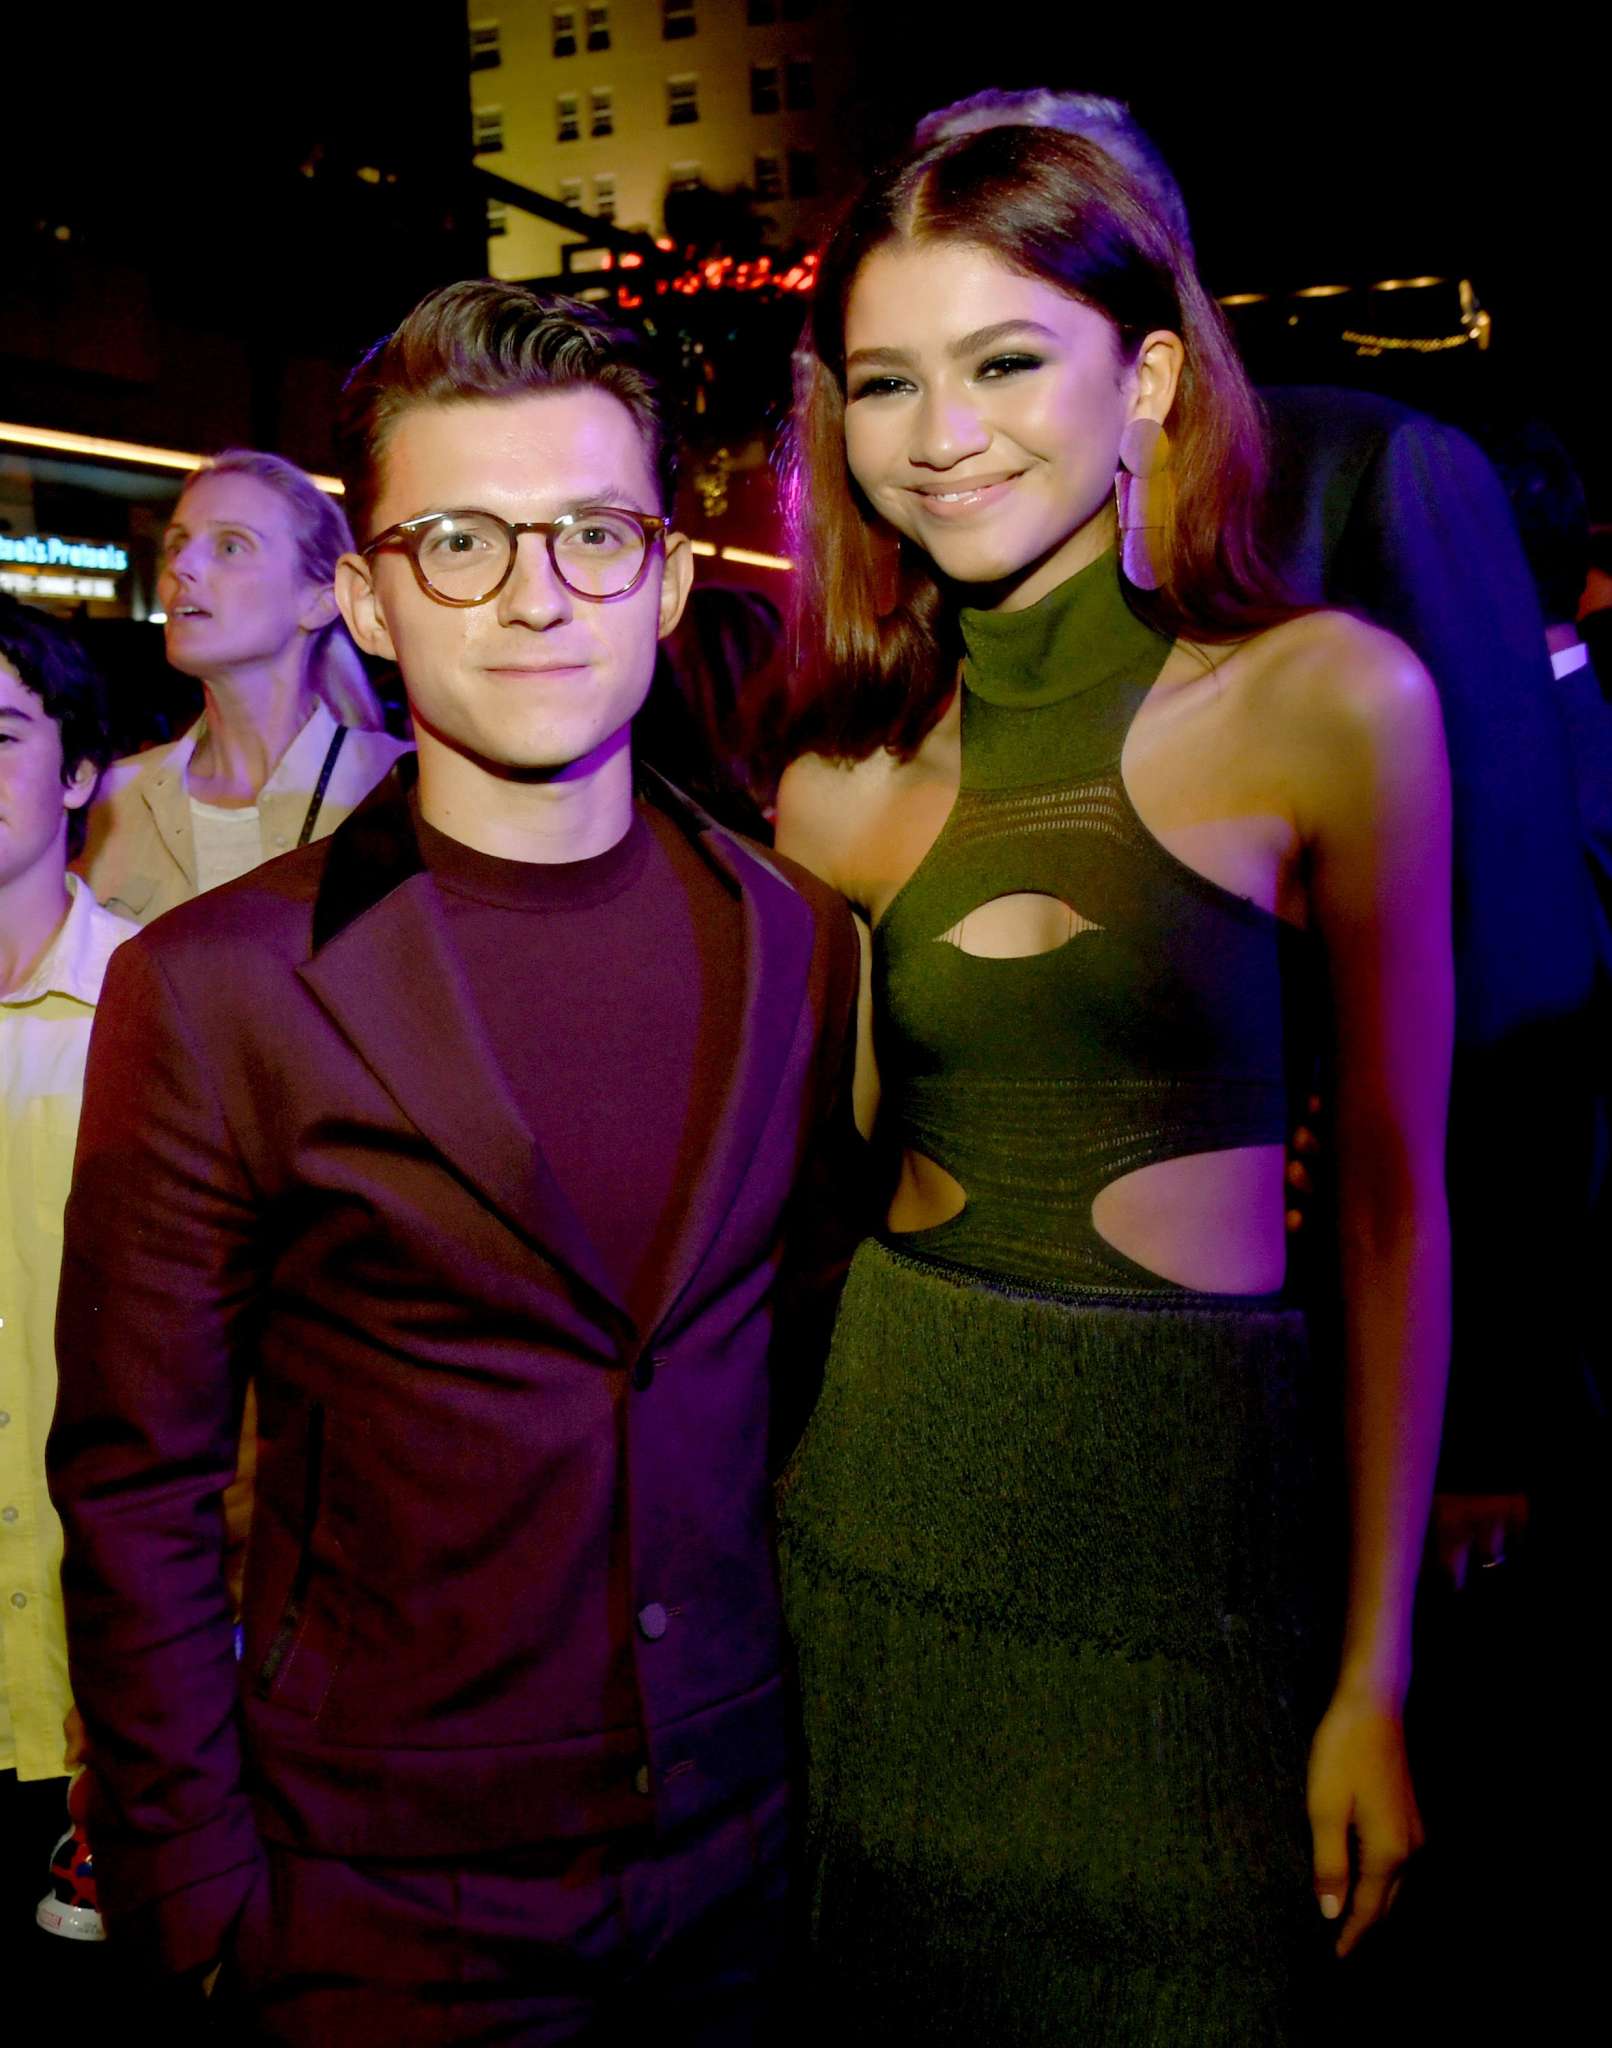 zendaya-responds-after-landing-in-scandal-accusing-her-of-promoting-drug-use-and-addiction